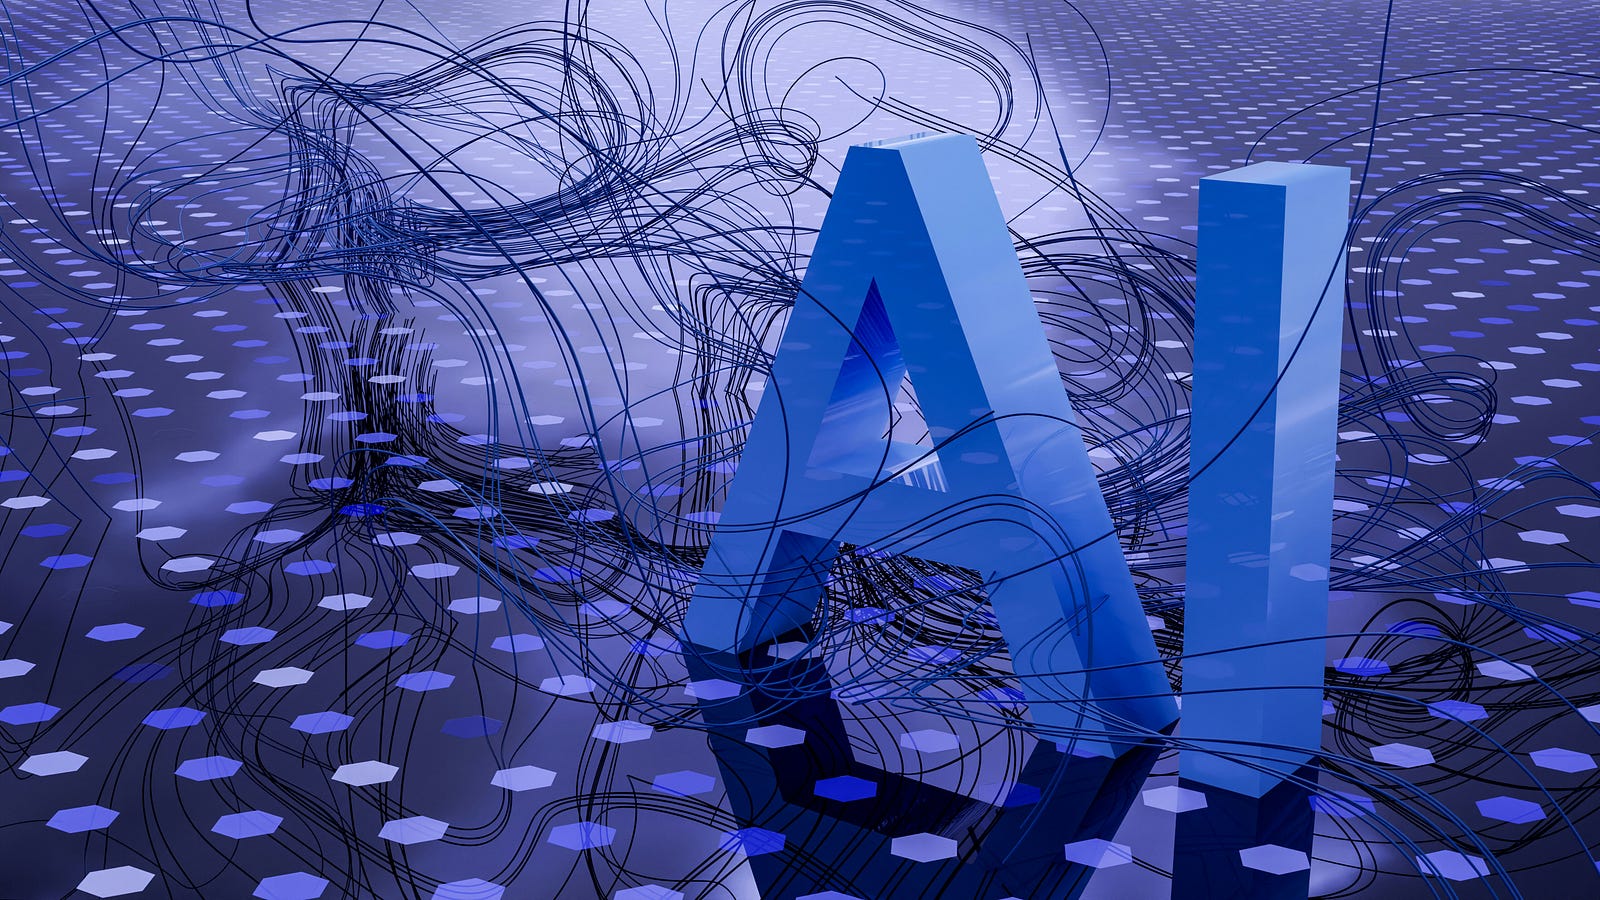 The letters A.I. in blue, with fibers wrapping around them.